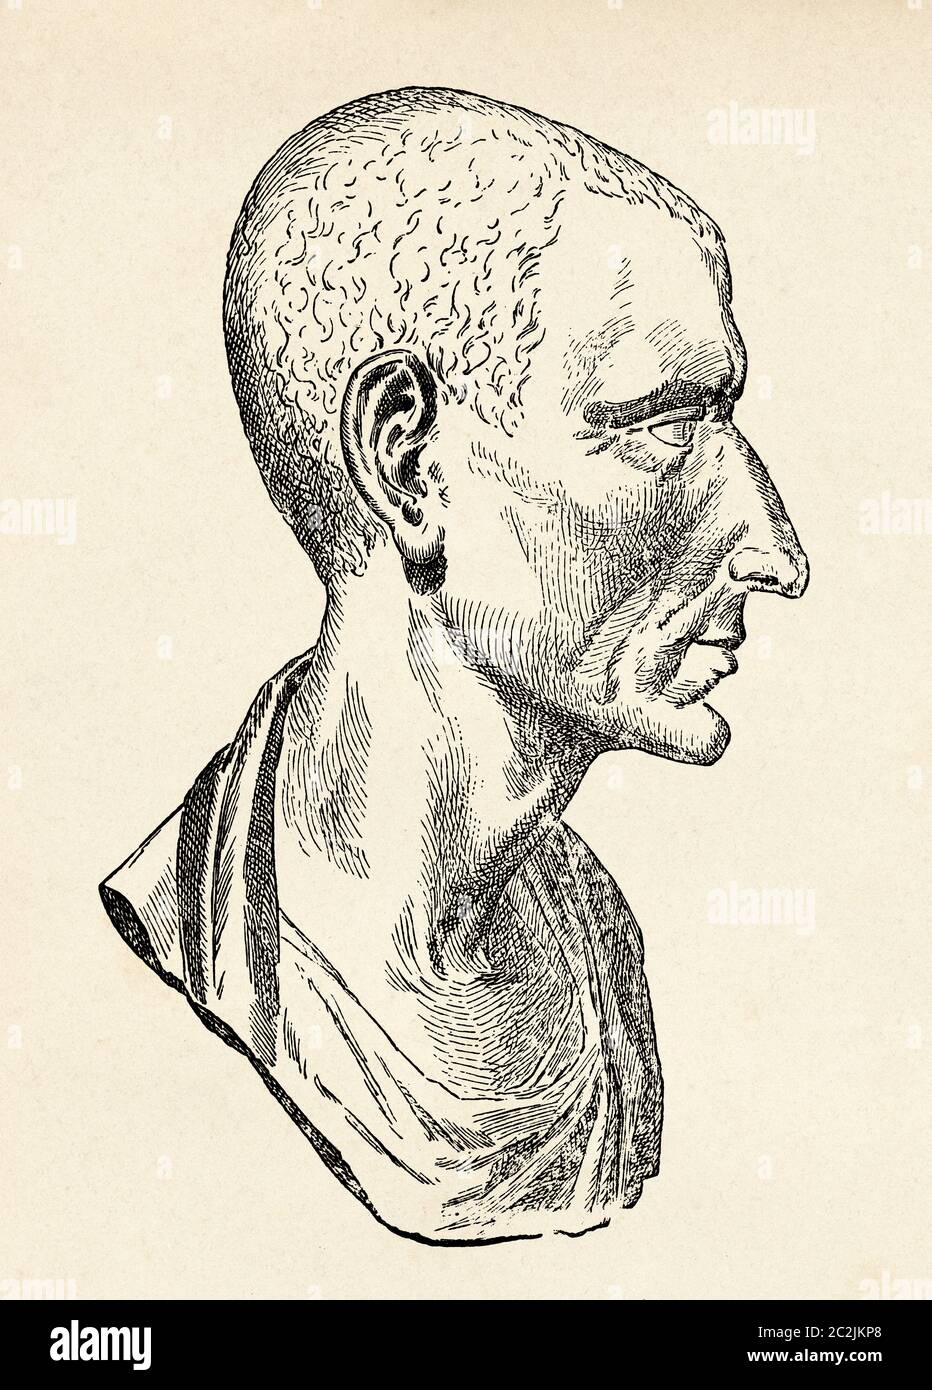 Gaius Julius Caesar or Gaius Julius Caesar (100-44 BC. ) Was a political and military Roman first century. C . member of the patricians Julios Césares, reached the highest magistrates of the Roman State and dominated the politics of the Republic after winning the civil war that confronted the most conservative sector of the Senate, Ancient Rome. Old 19th century engraved illustration, El Mundo Ilustrado 1880 Stock Photo